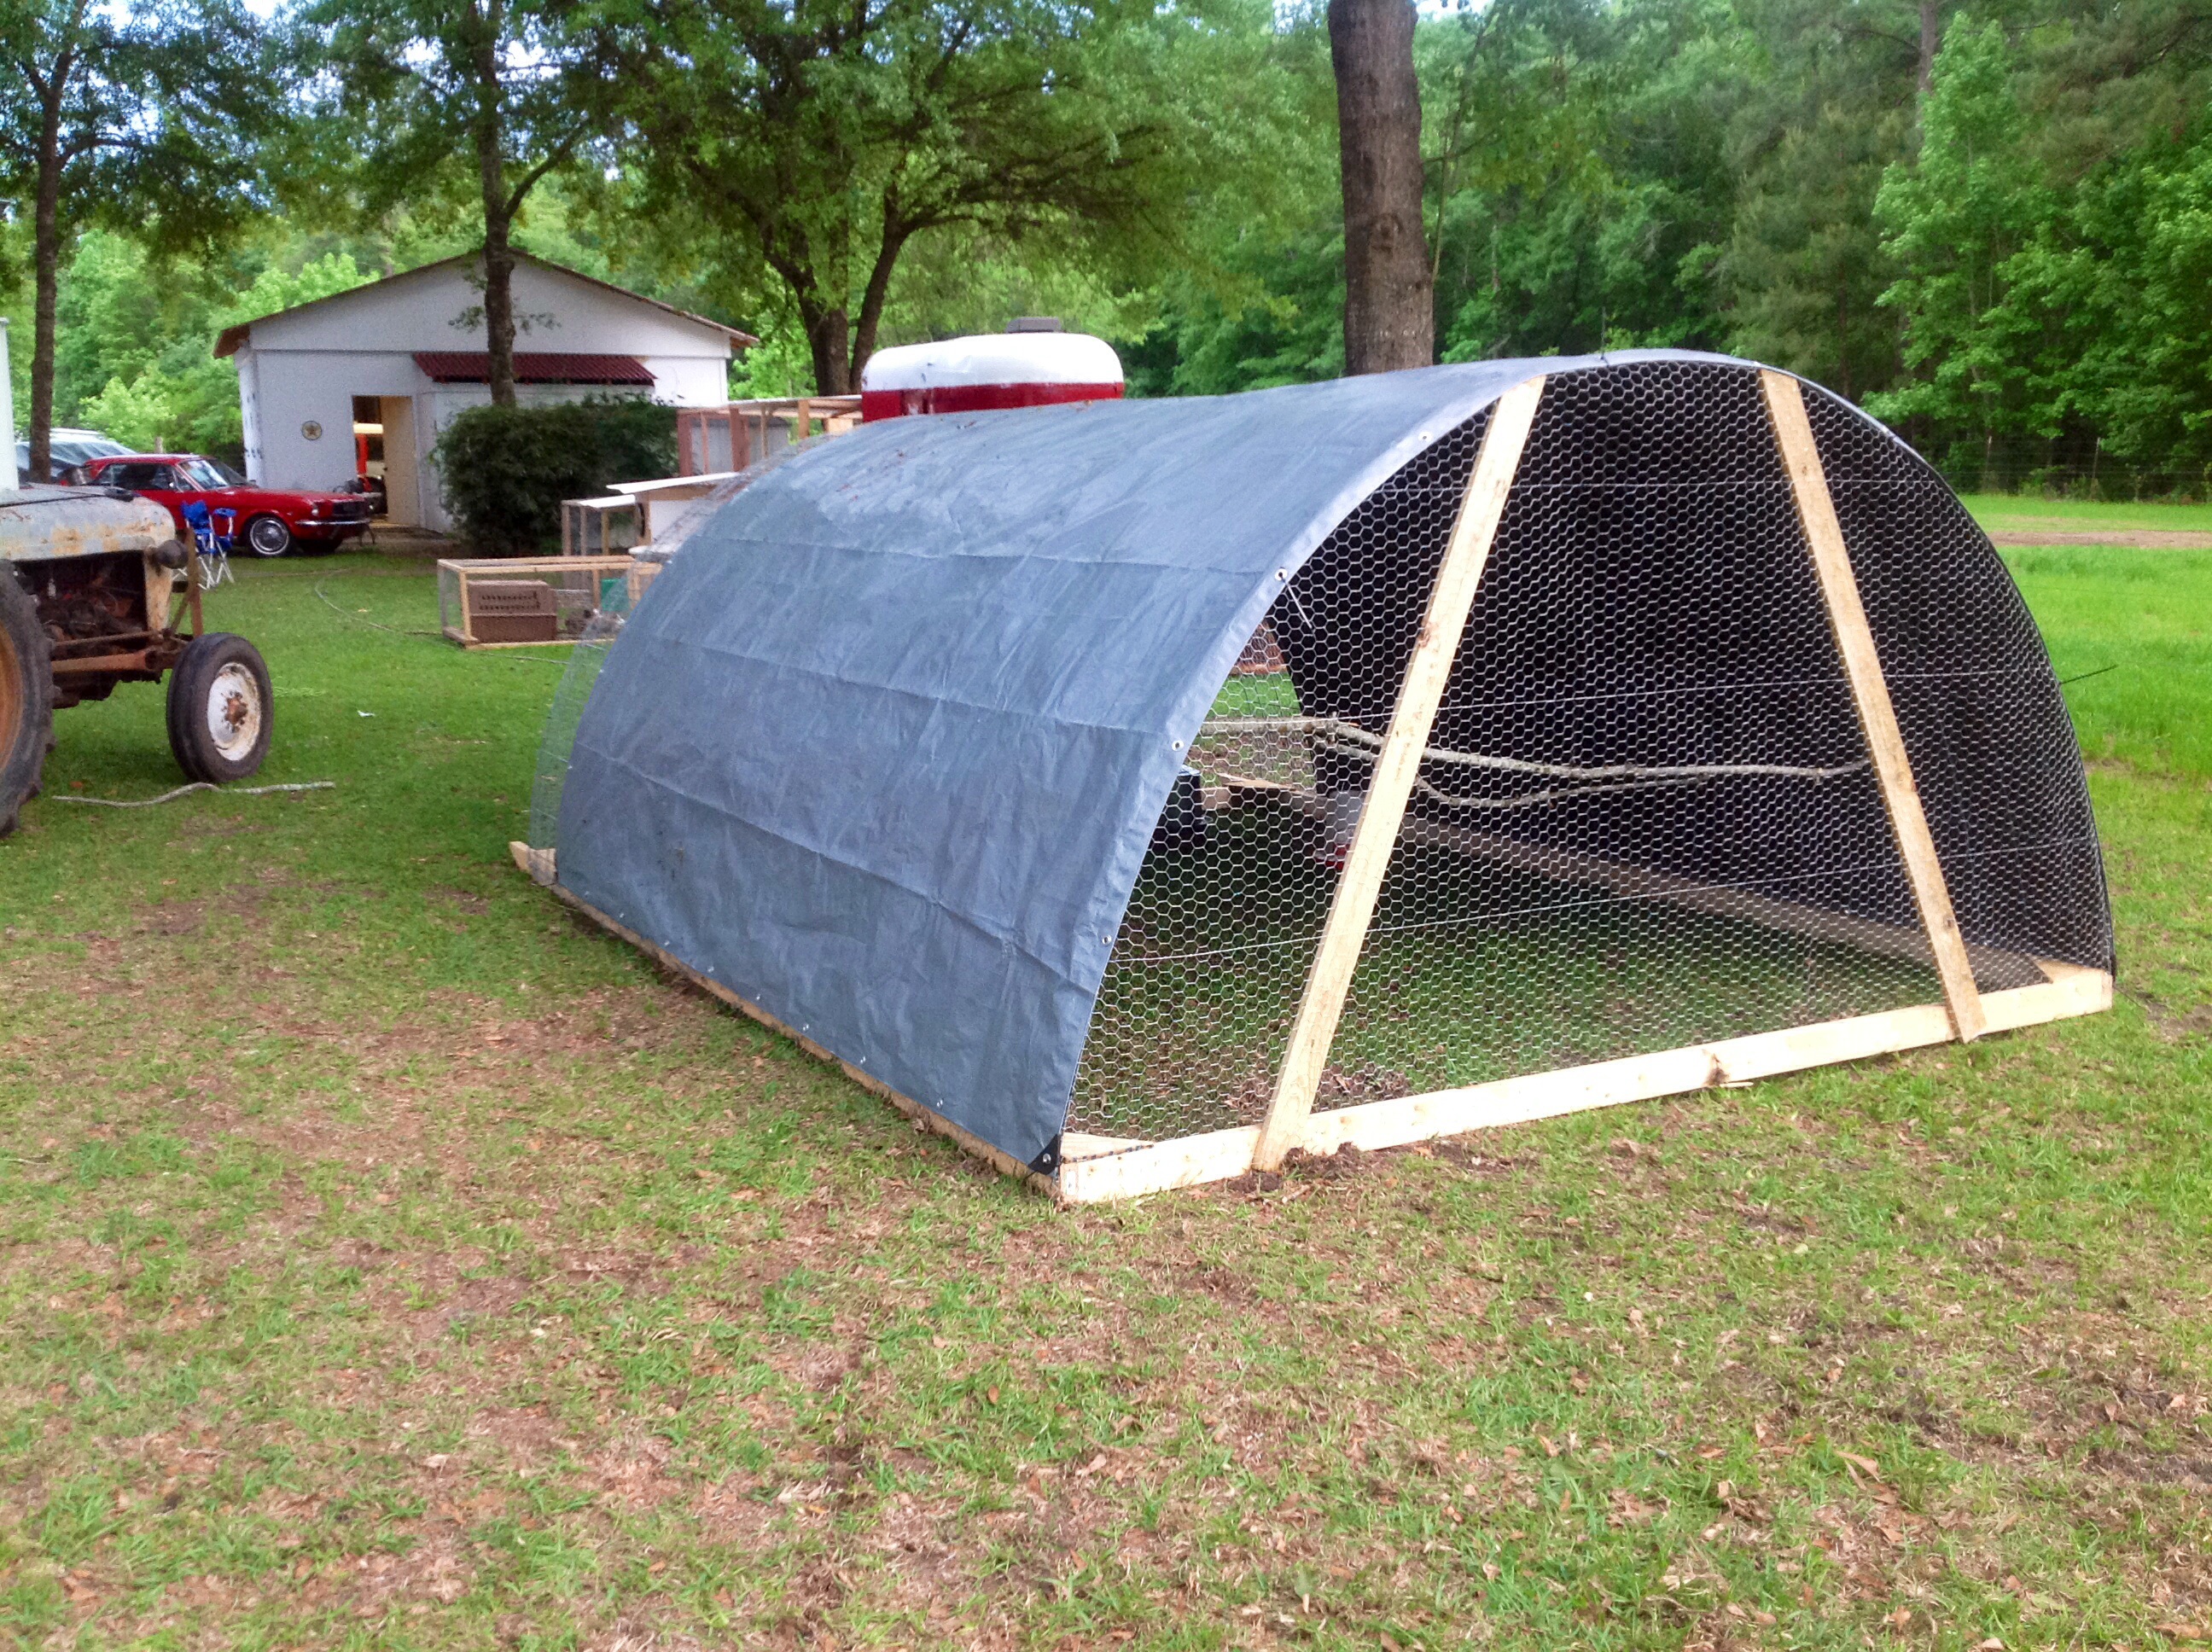 Portable coop 12' x 10' for Turkey's / Chickens